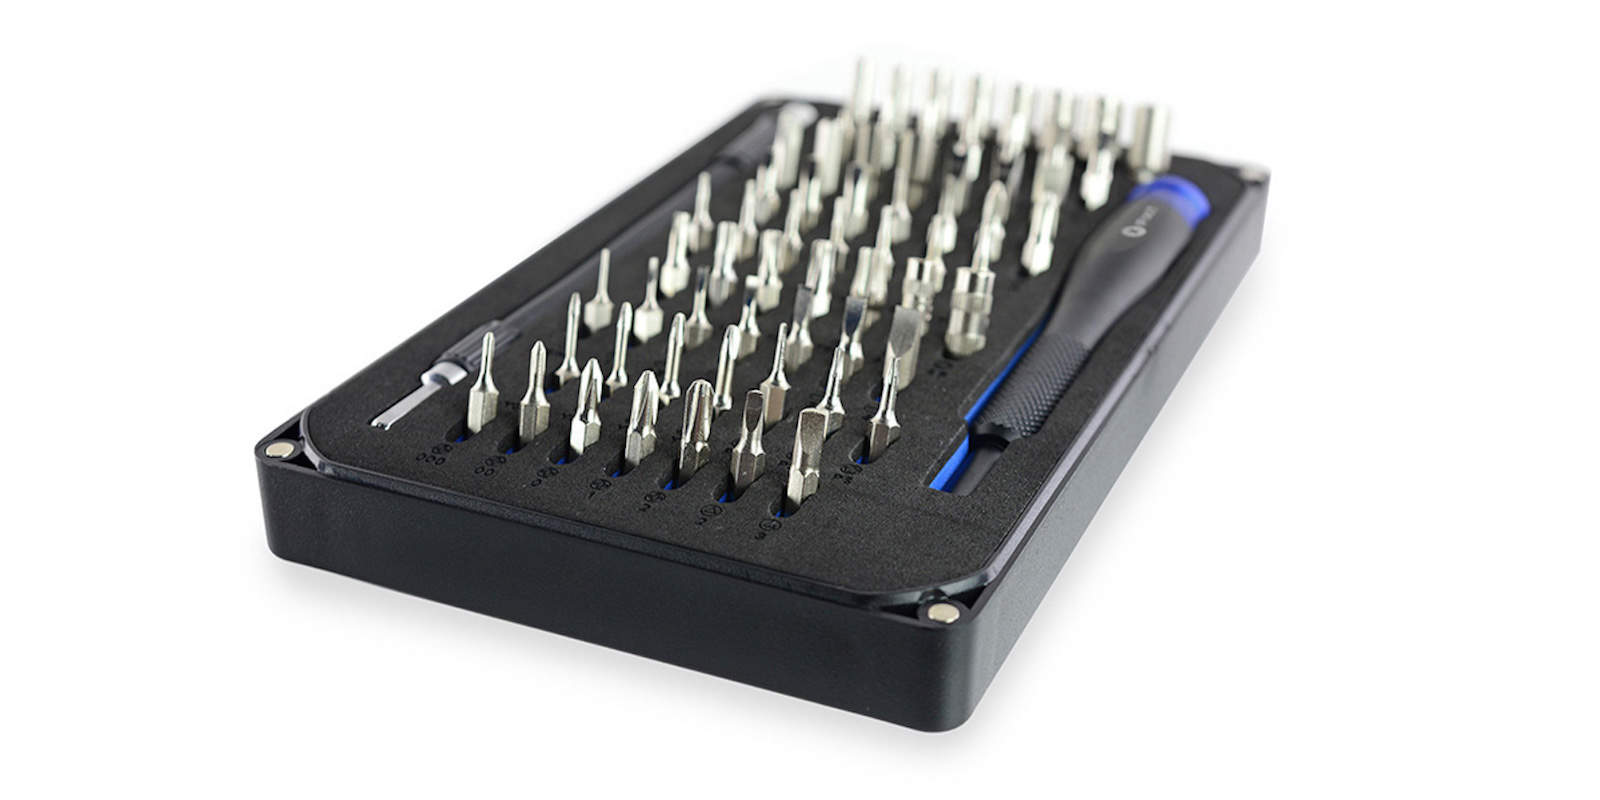 iFixit's 64-bit driver kit gives you the tools you need to repair your own electronics.